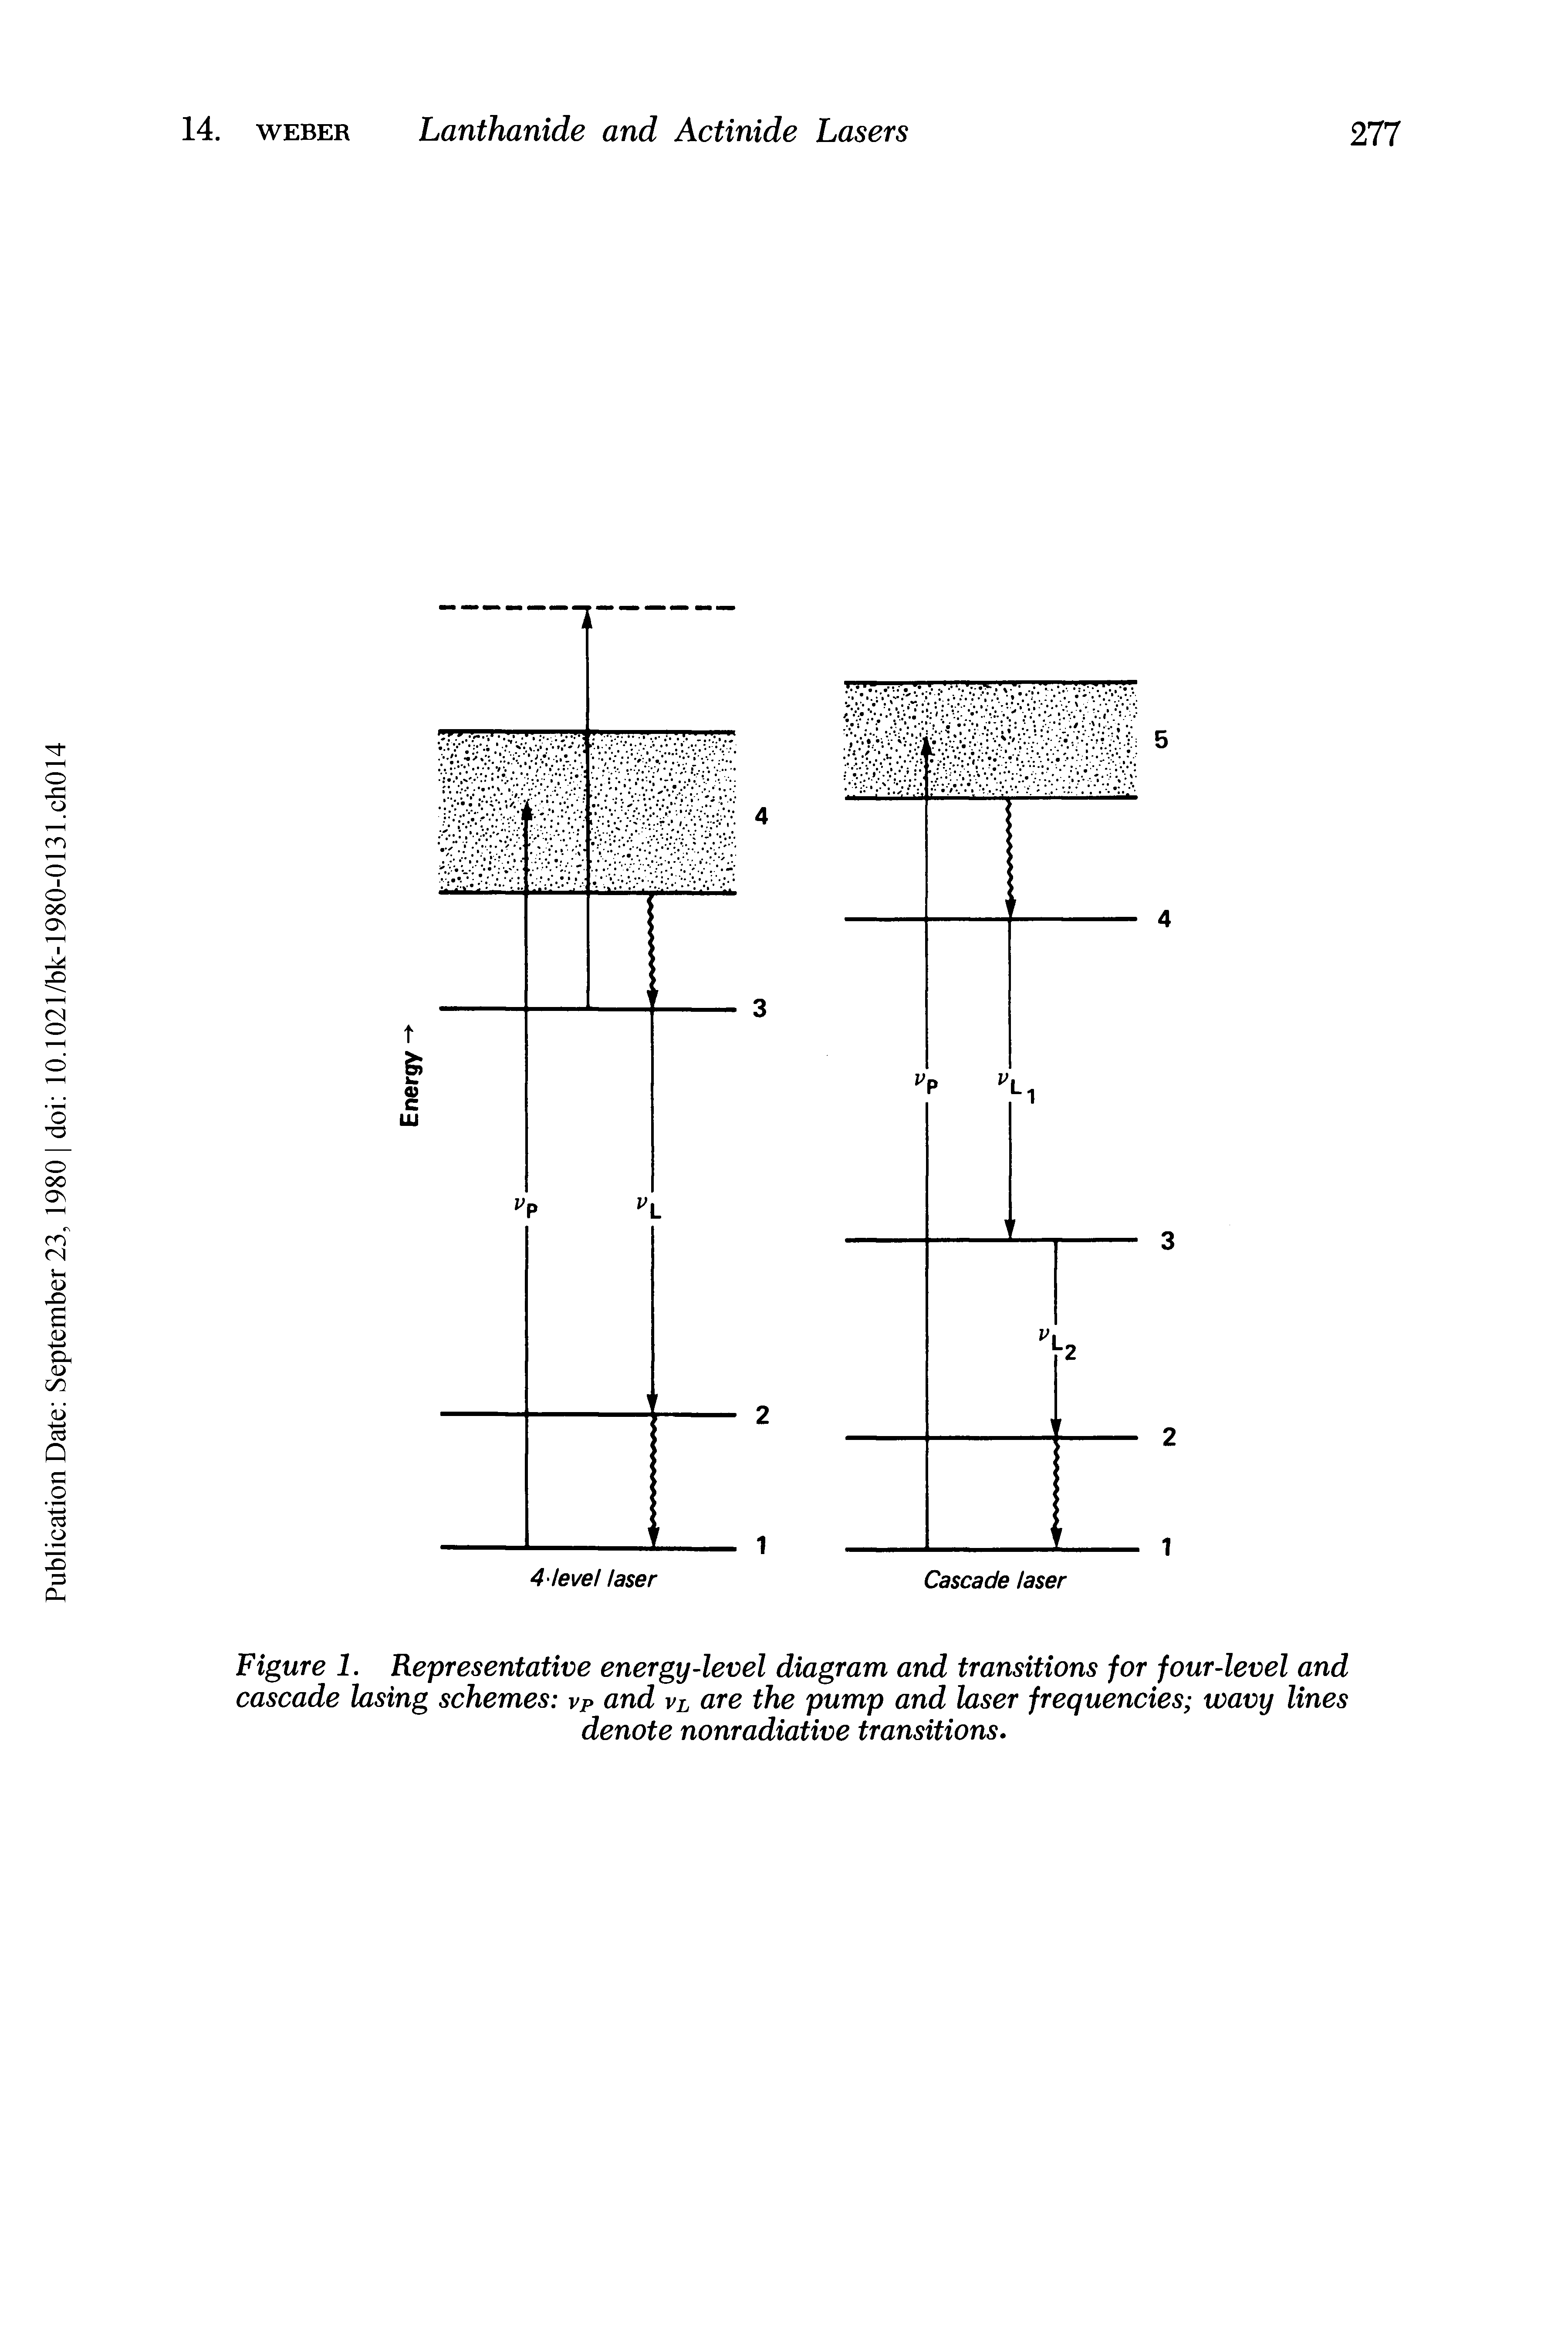 Figure 1. Representative energy-level diagram and transitions for four-level and cascade lasing schemes vP and vL are the pump and laser frequencies wavy lines denote nonradiative transitions.